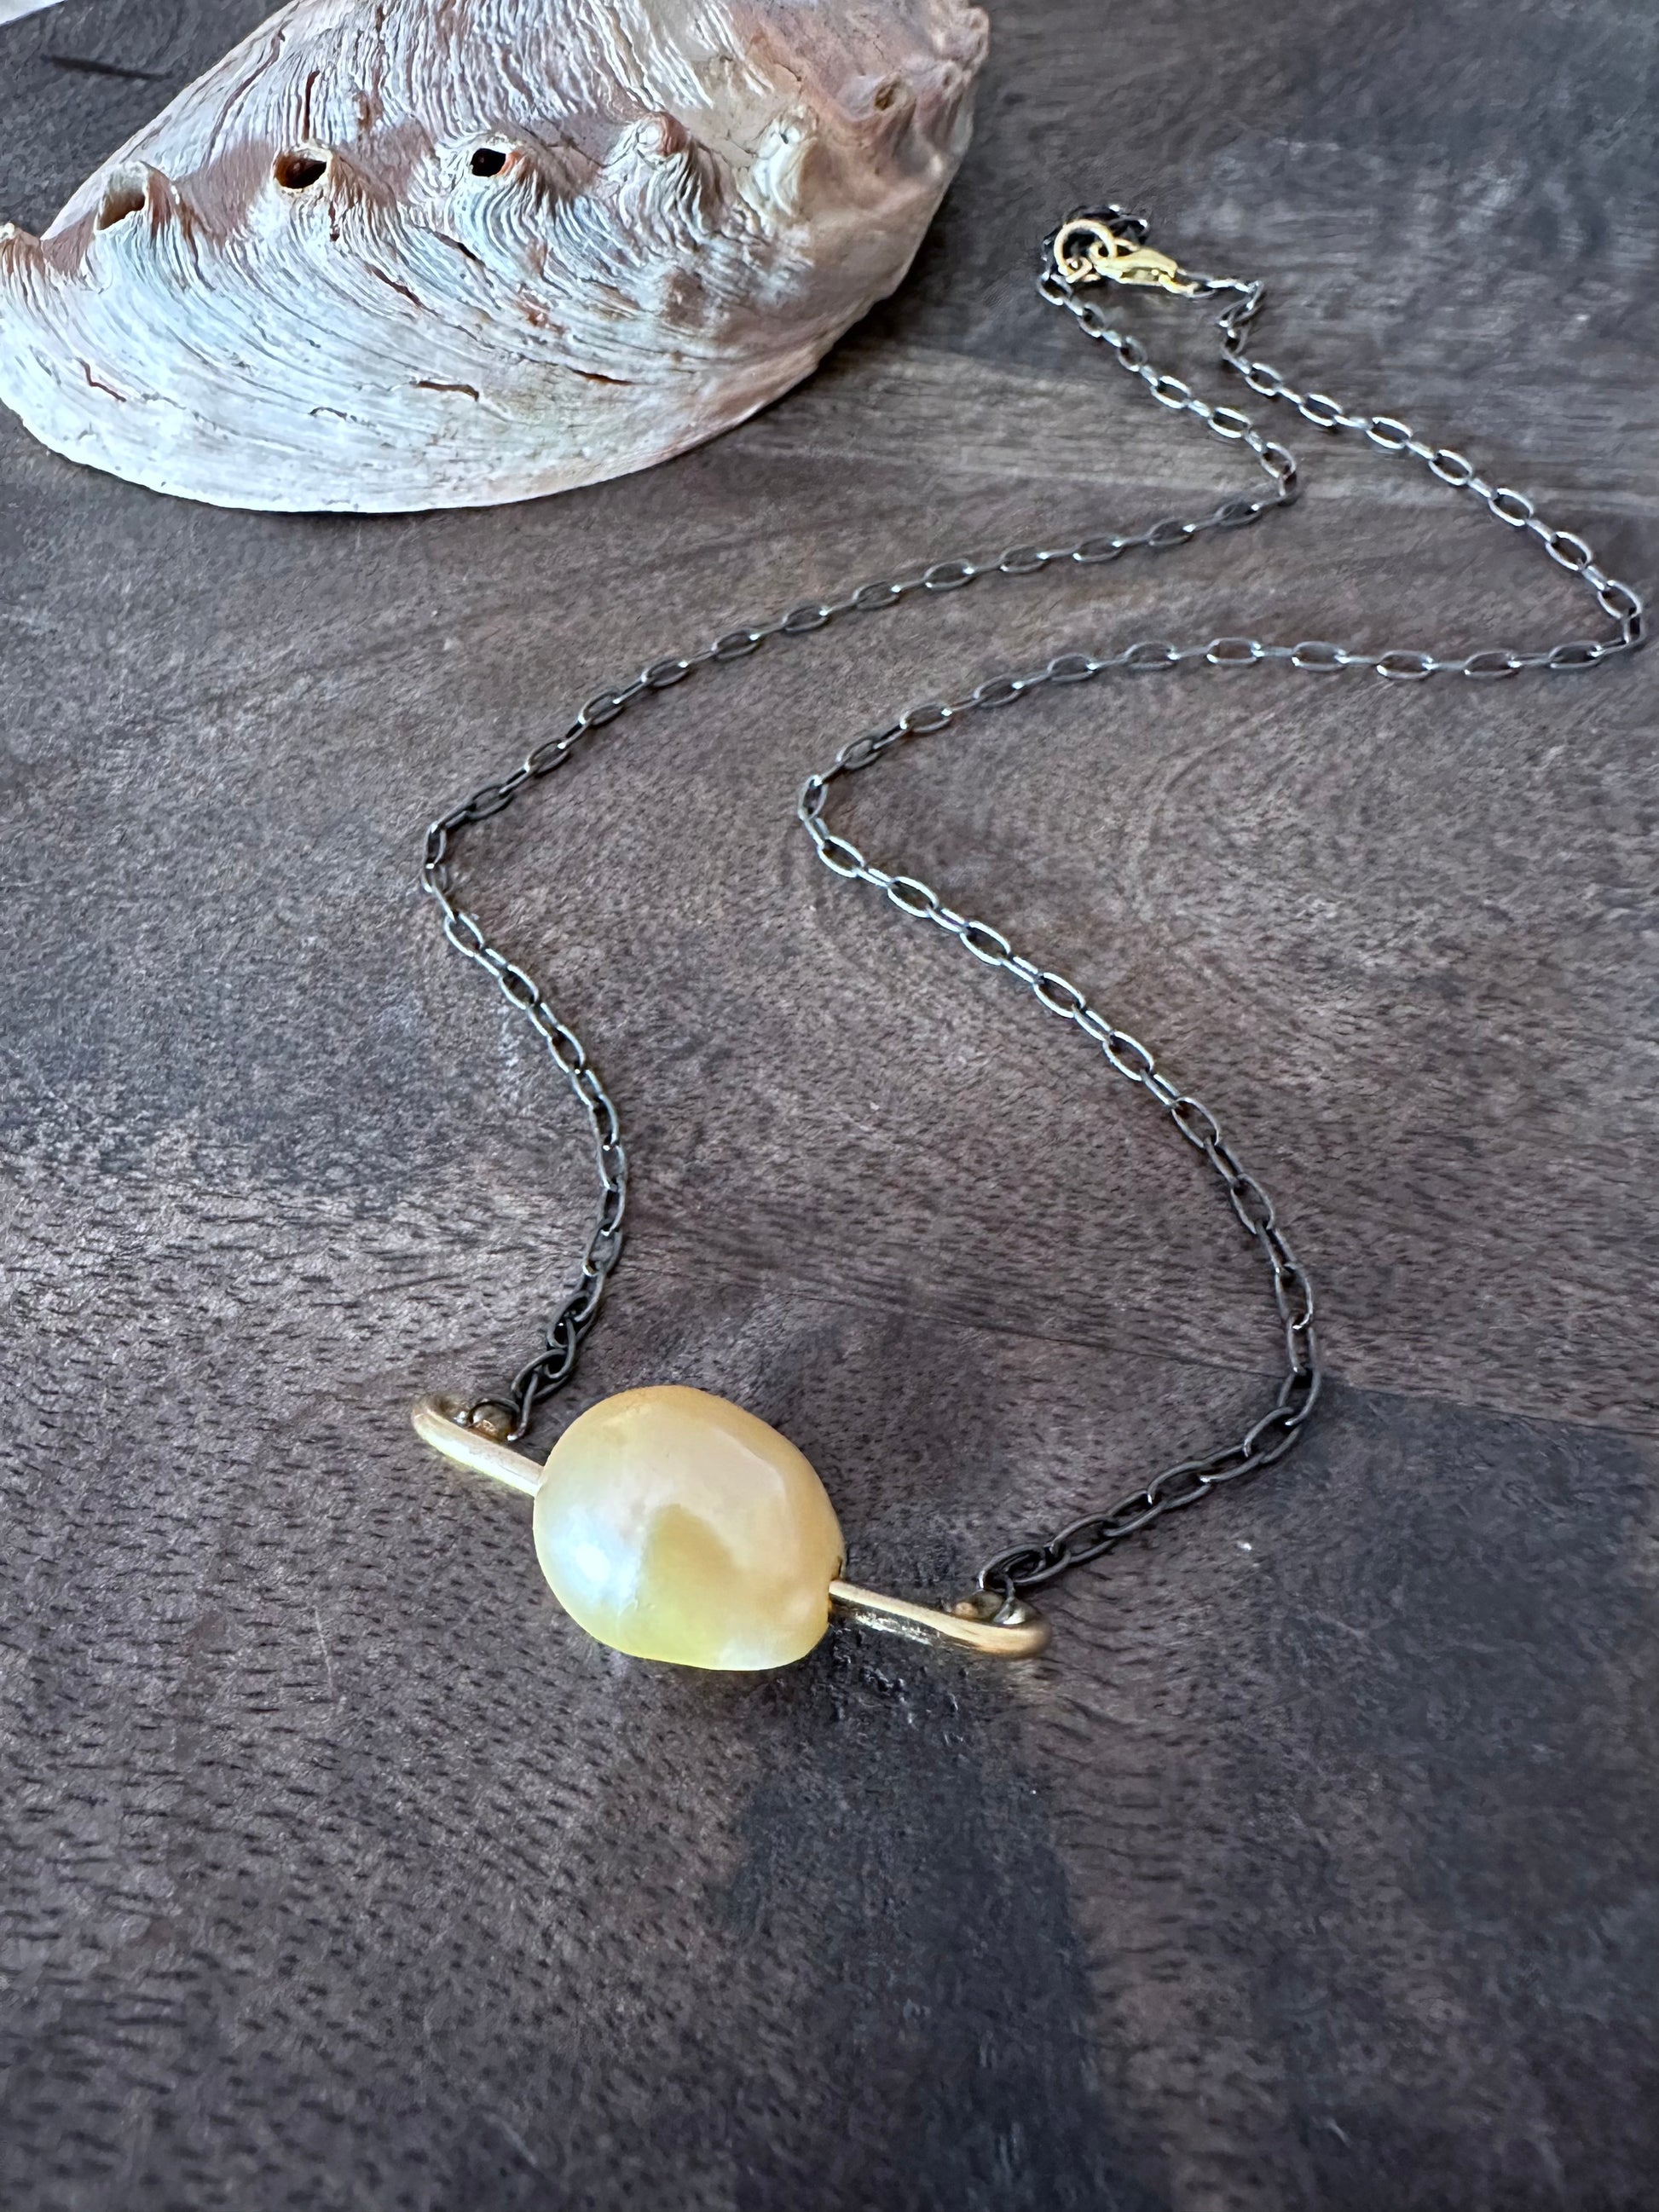 a necklace on a dark wooden background. the necklace has a yellow/pink pearl with a gold bar gong through it on a darkened silver chain. there is an abalone shell in the upper left corner.